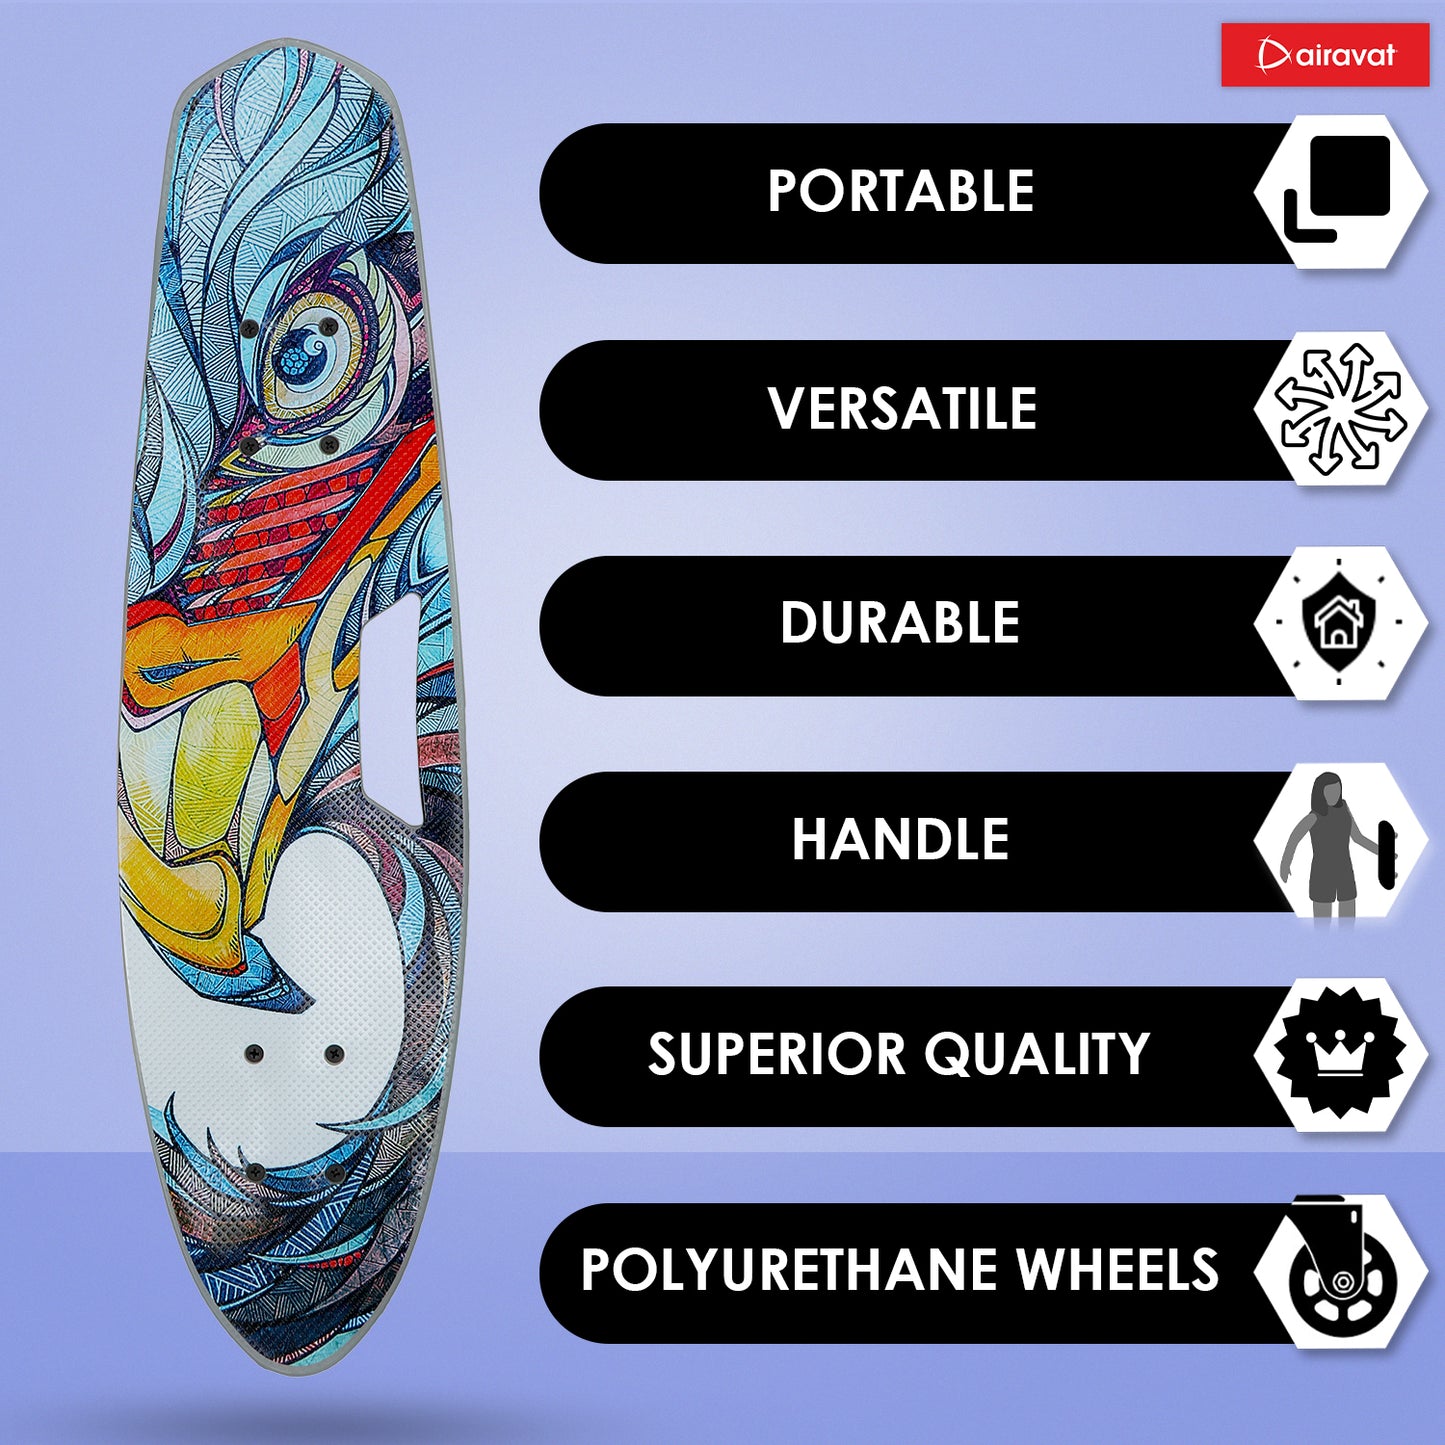 7818-skateboard-style4-more-features